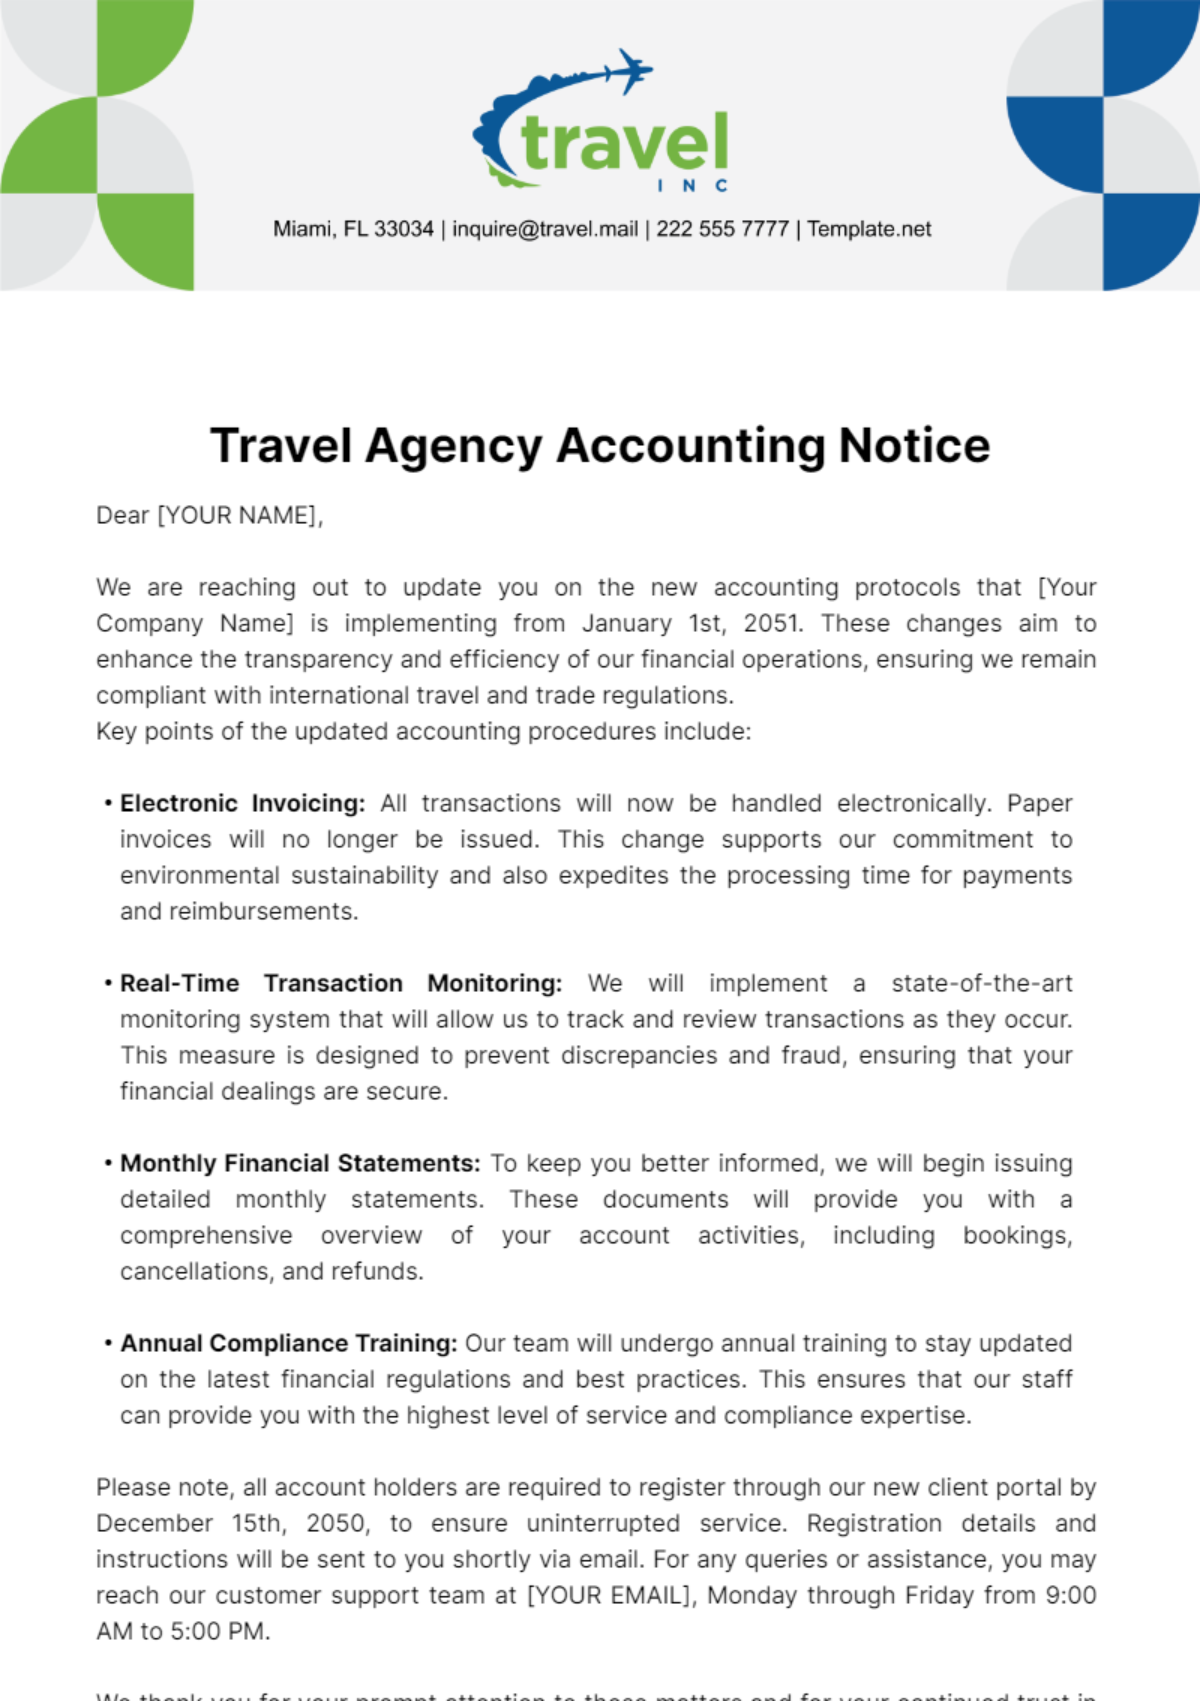 Travel Agency Accounting Notice Template